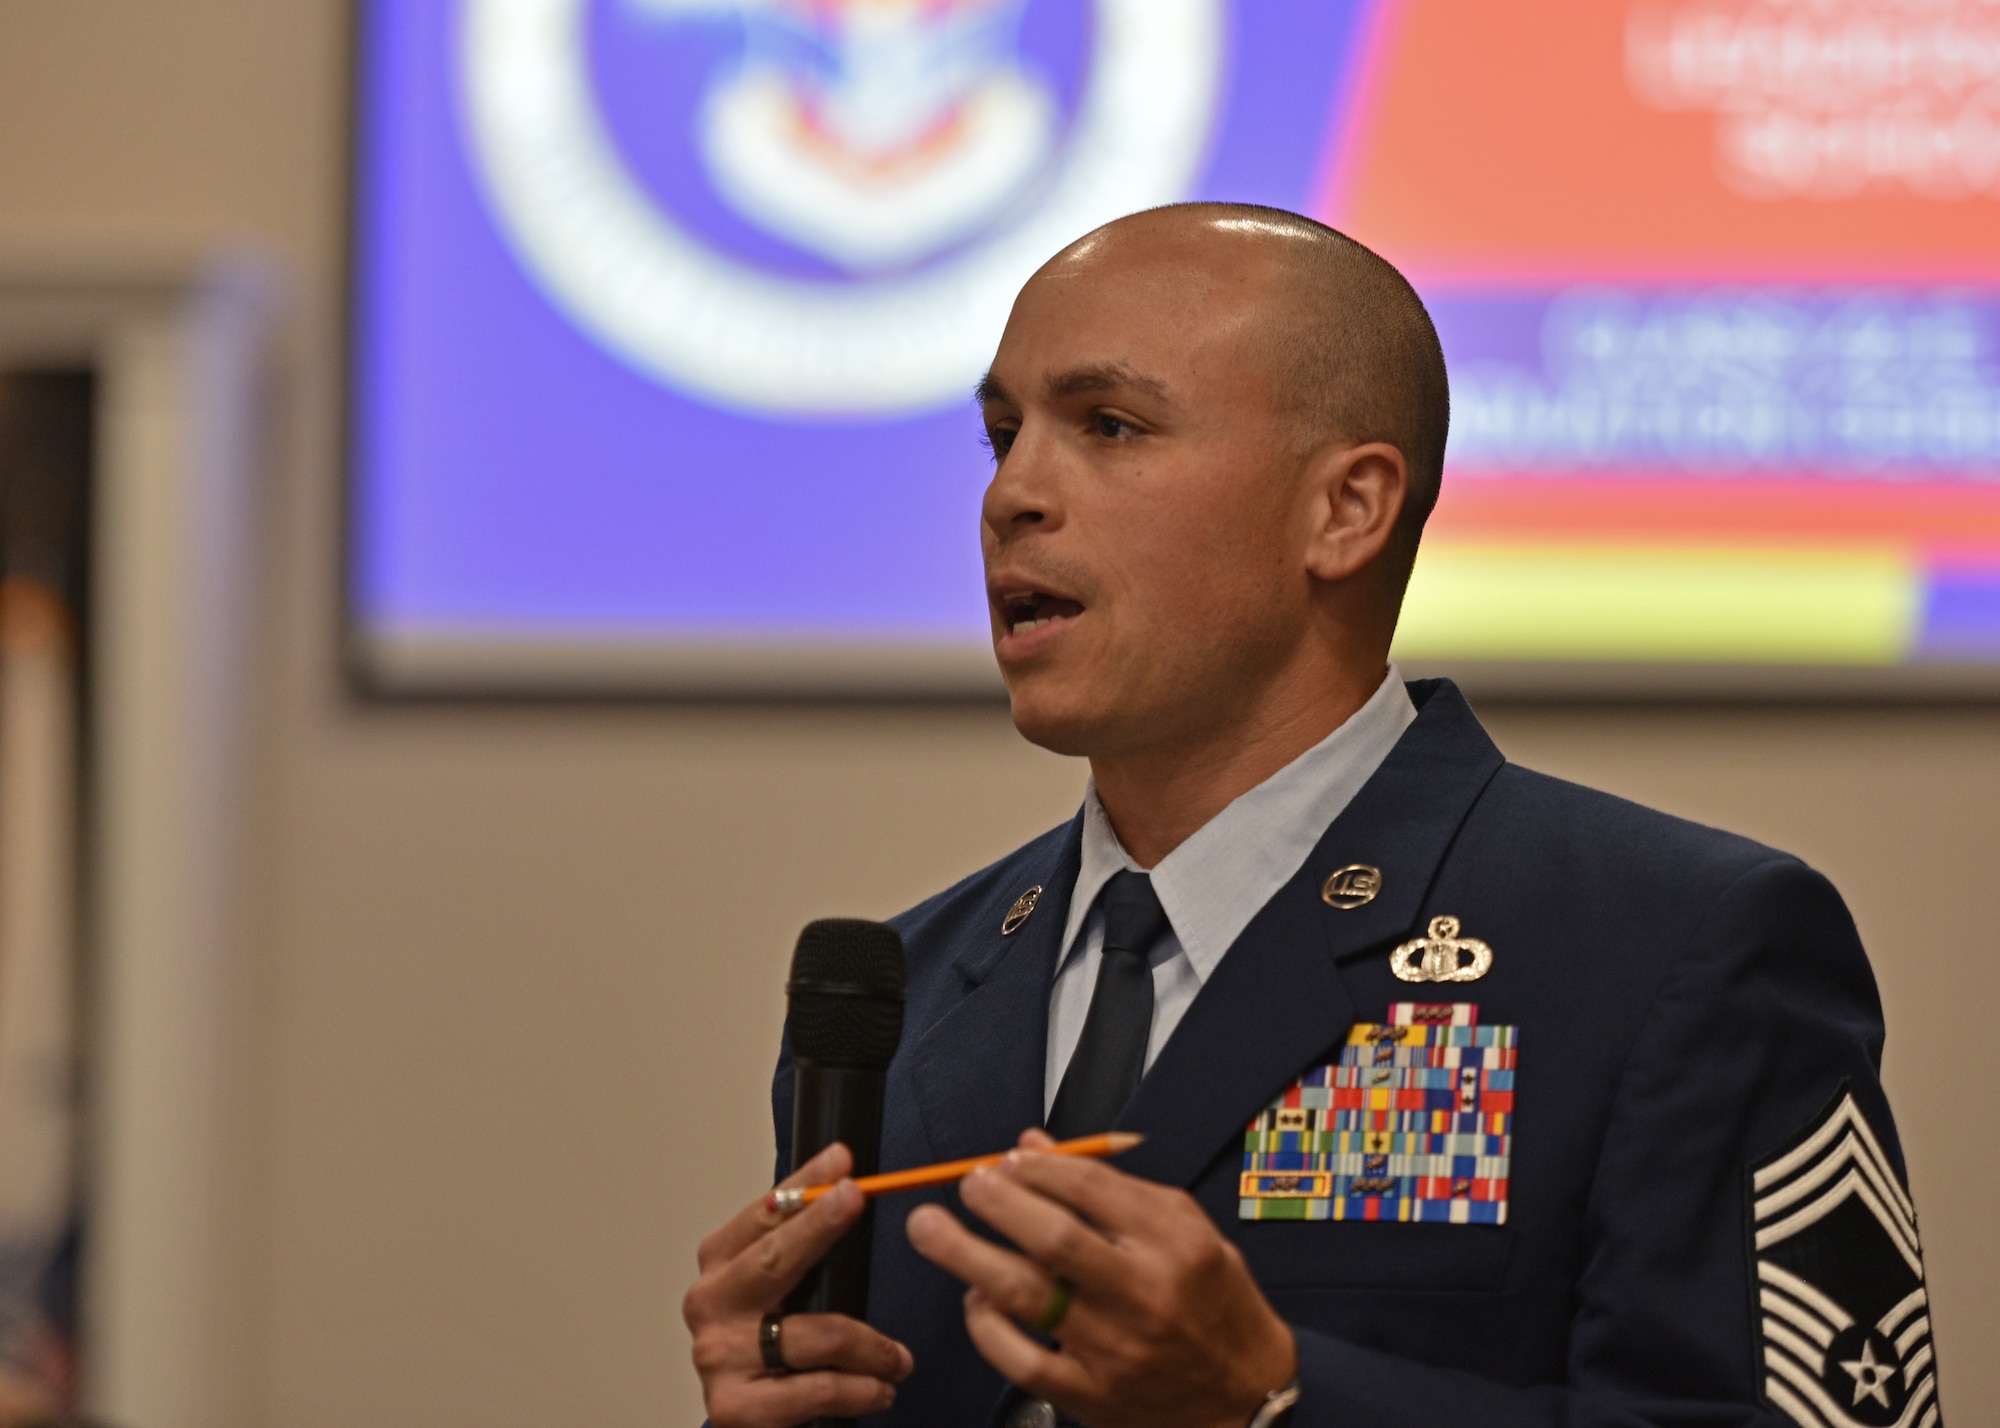 U.S. Air Force Chief Master Sgt. Joshua Matias, 47th Operations Support Squadron senior enlisted leader, speaks during the Airman Leadership School graduation at the Powell Event Center, Goodfellow Air Force Base, Texas, July 7, 2022. Matias offered advice to the new graduates and emphasized taking care of your Airmen and standing up for them as their supervisor. (U.S. Air Force photo by Senior Airman Ashley Thrash)